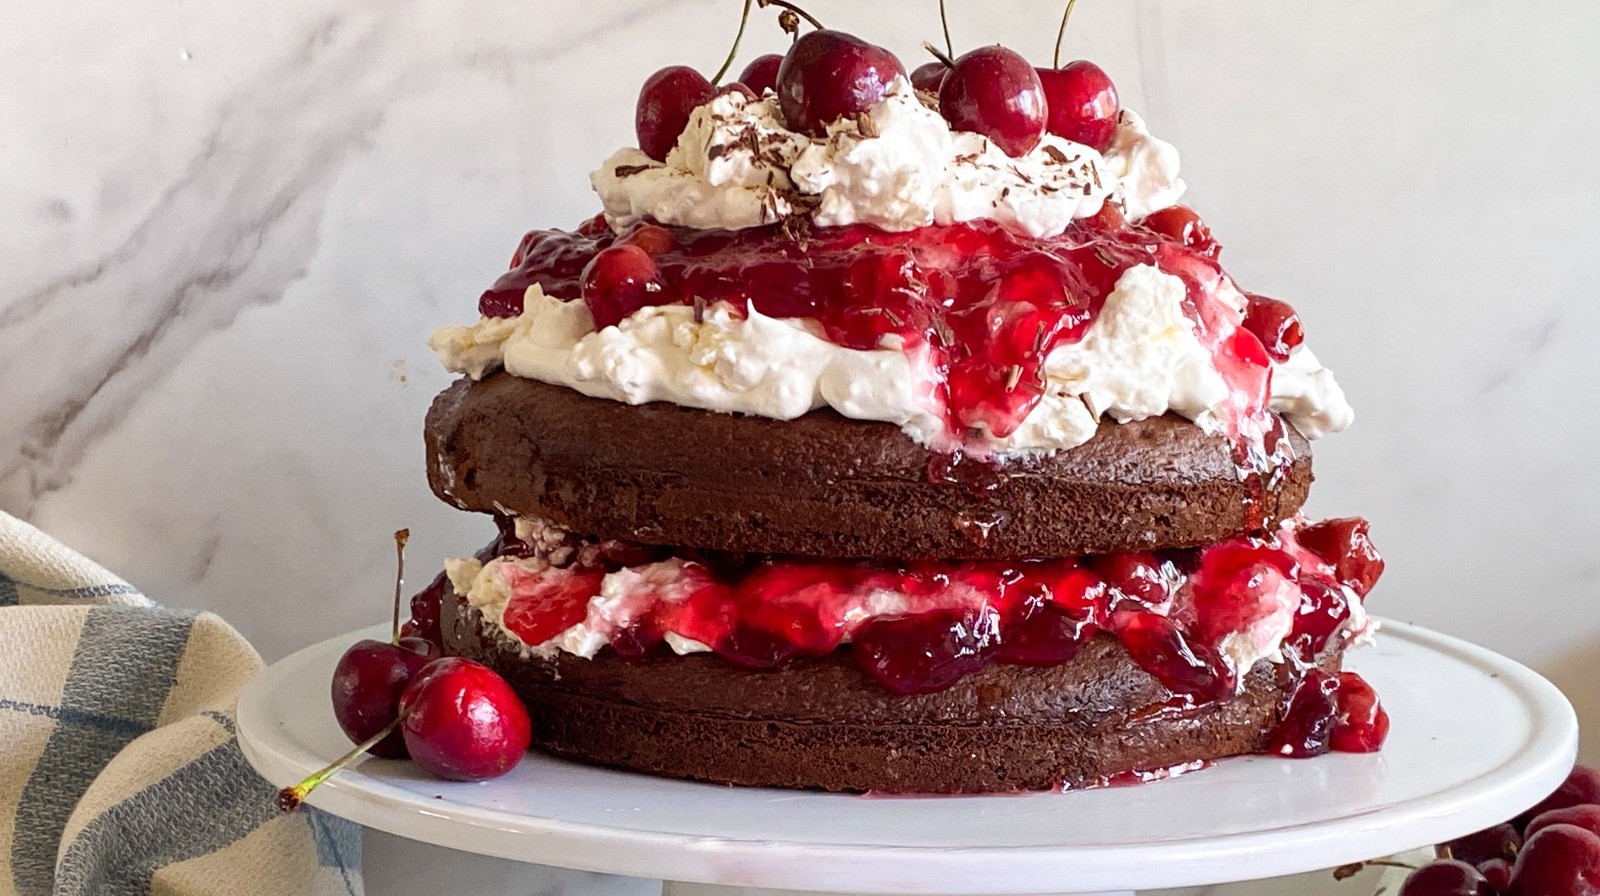 Black Forest Gateau Delivery | Patisserie Valerie